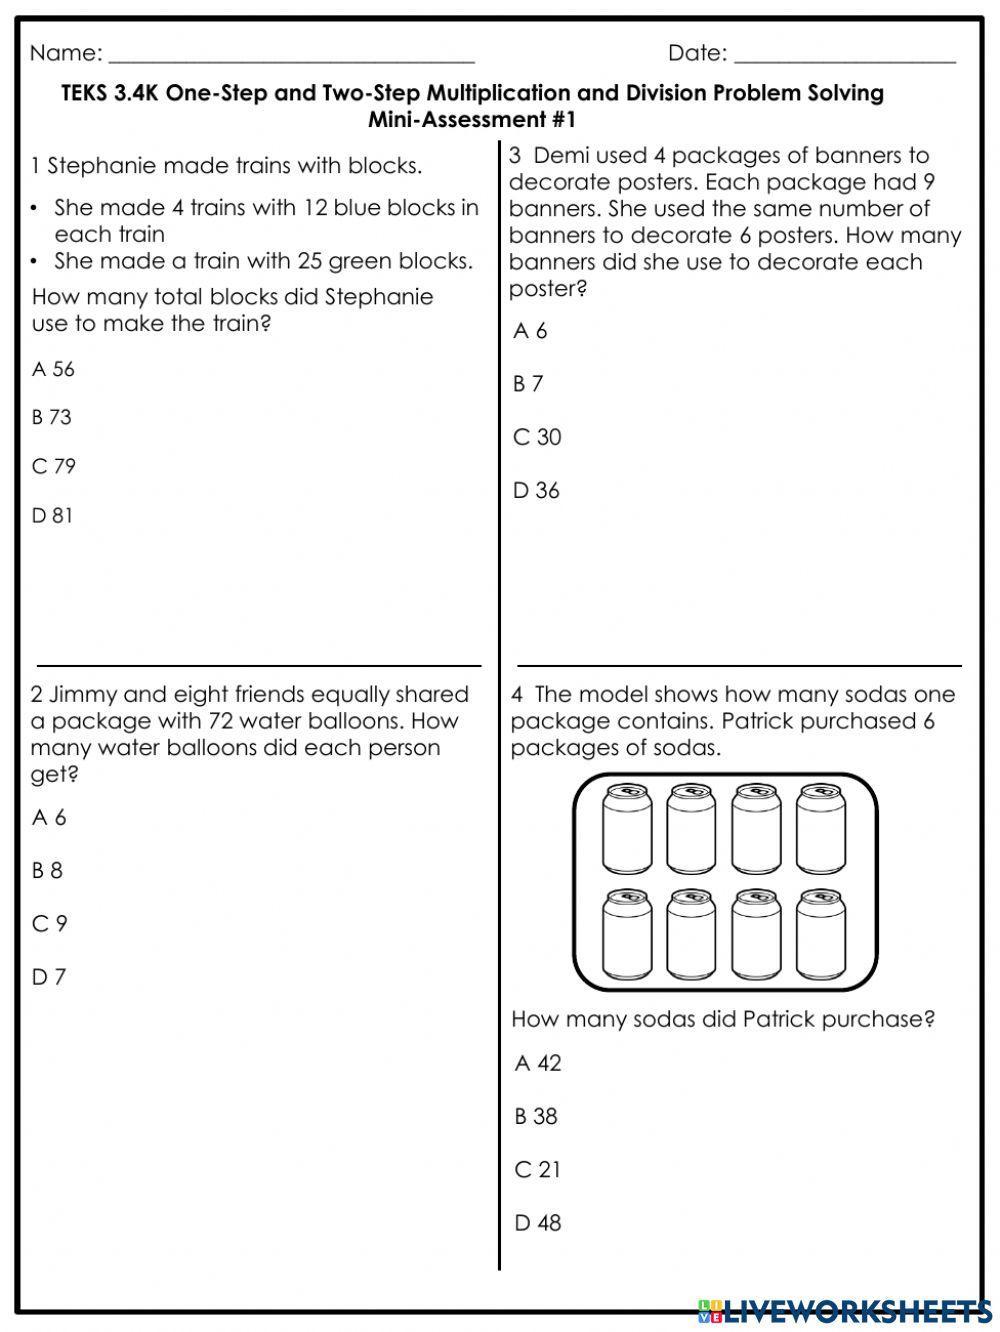 One-Step and Two-Step Multiplication and Division Problem Solving 3.4k